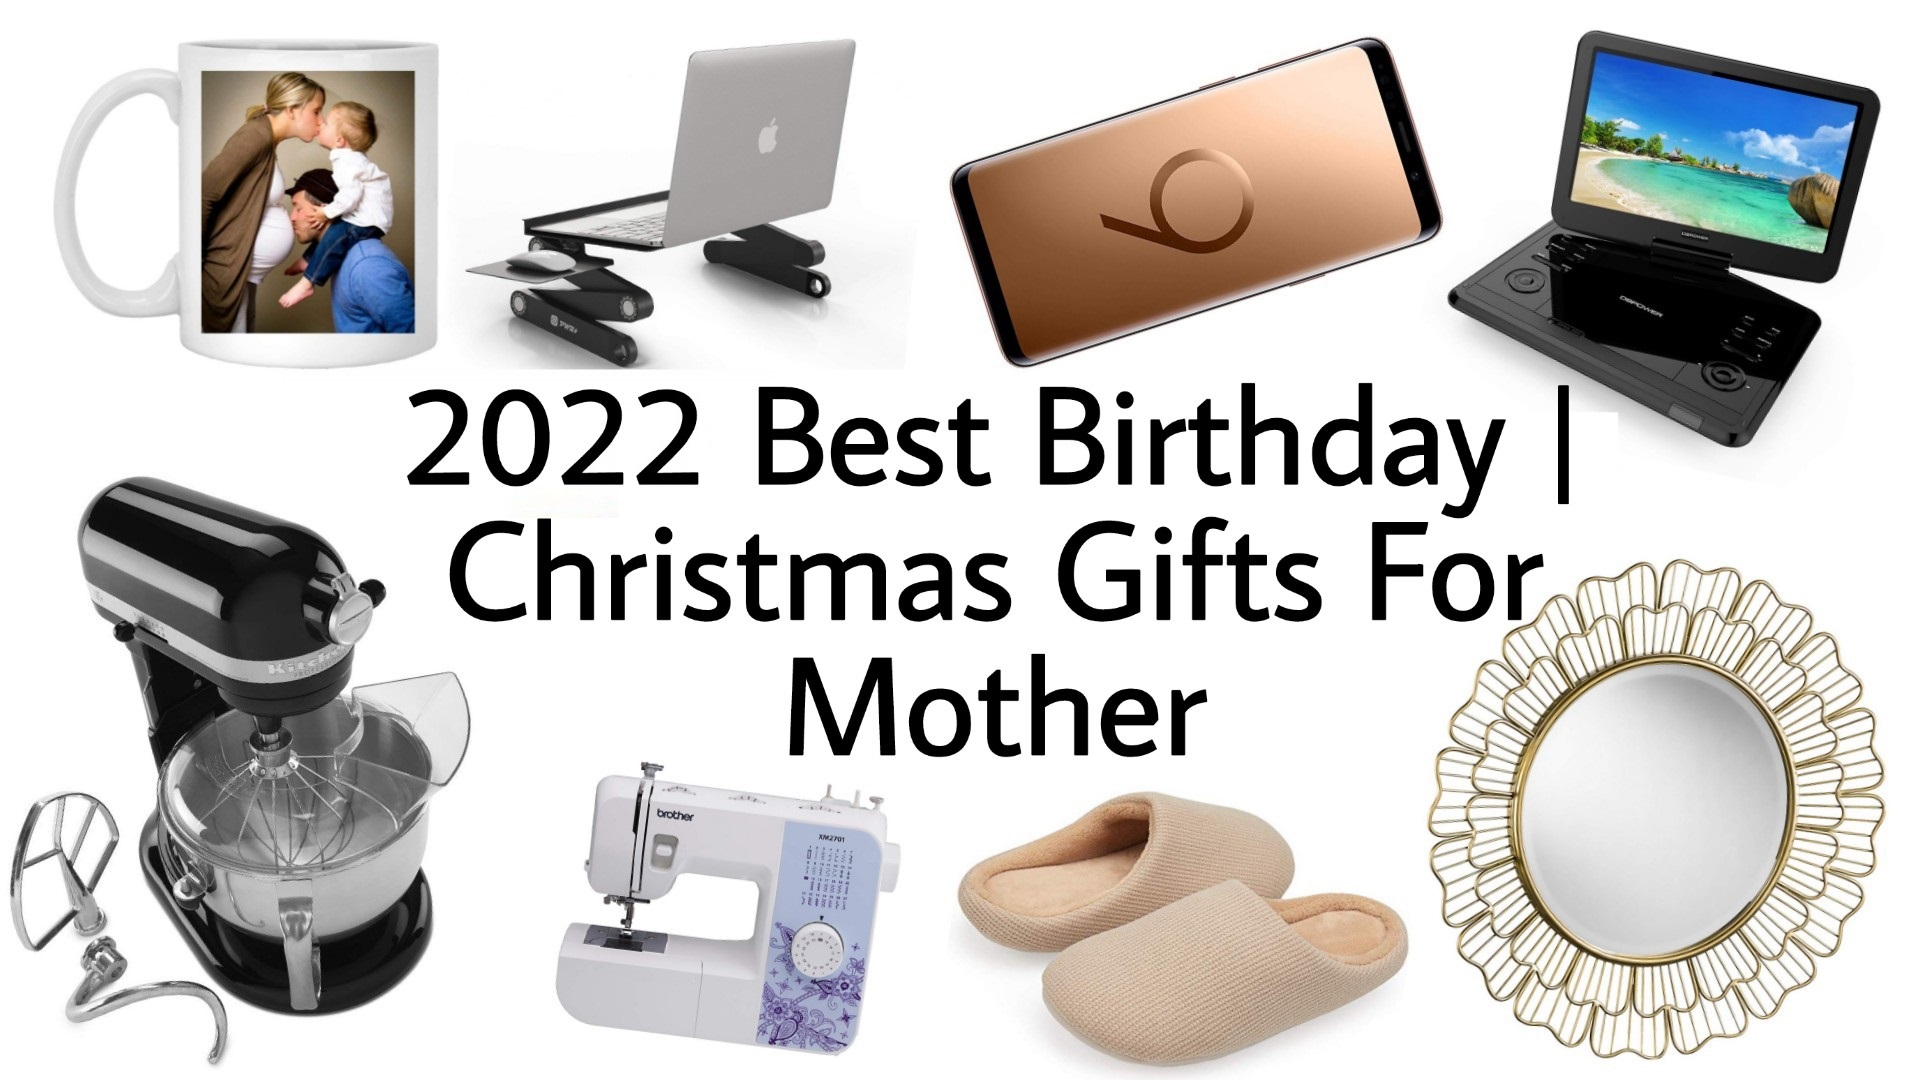 Best Christmas Gifts for Mom 2022 | Best Birthday Gift Ideas for Mother in 2022